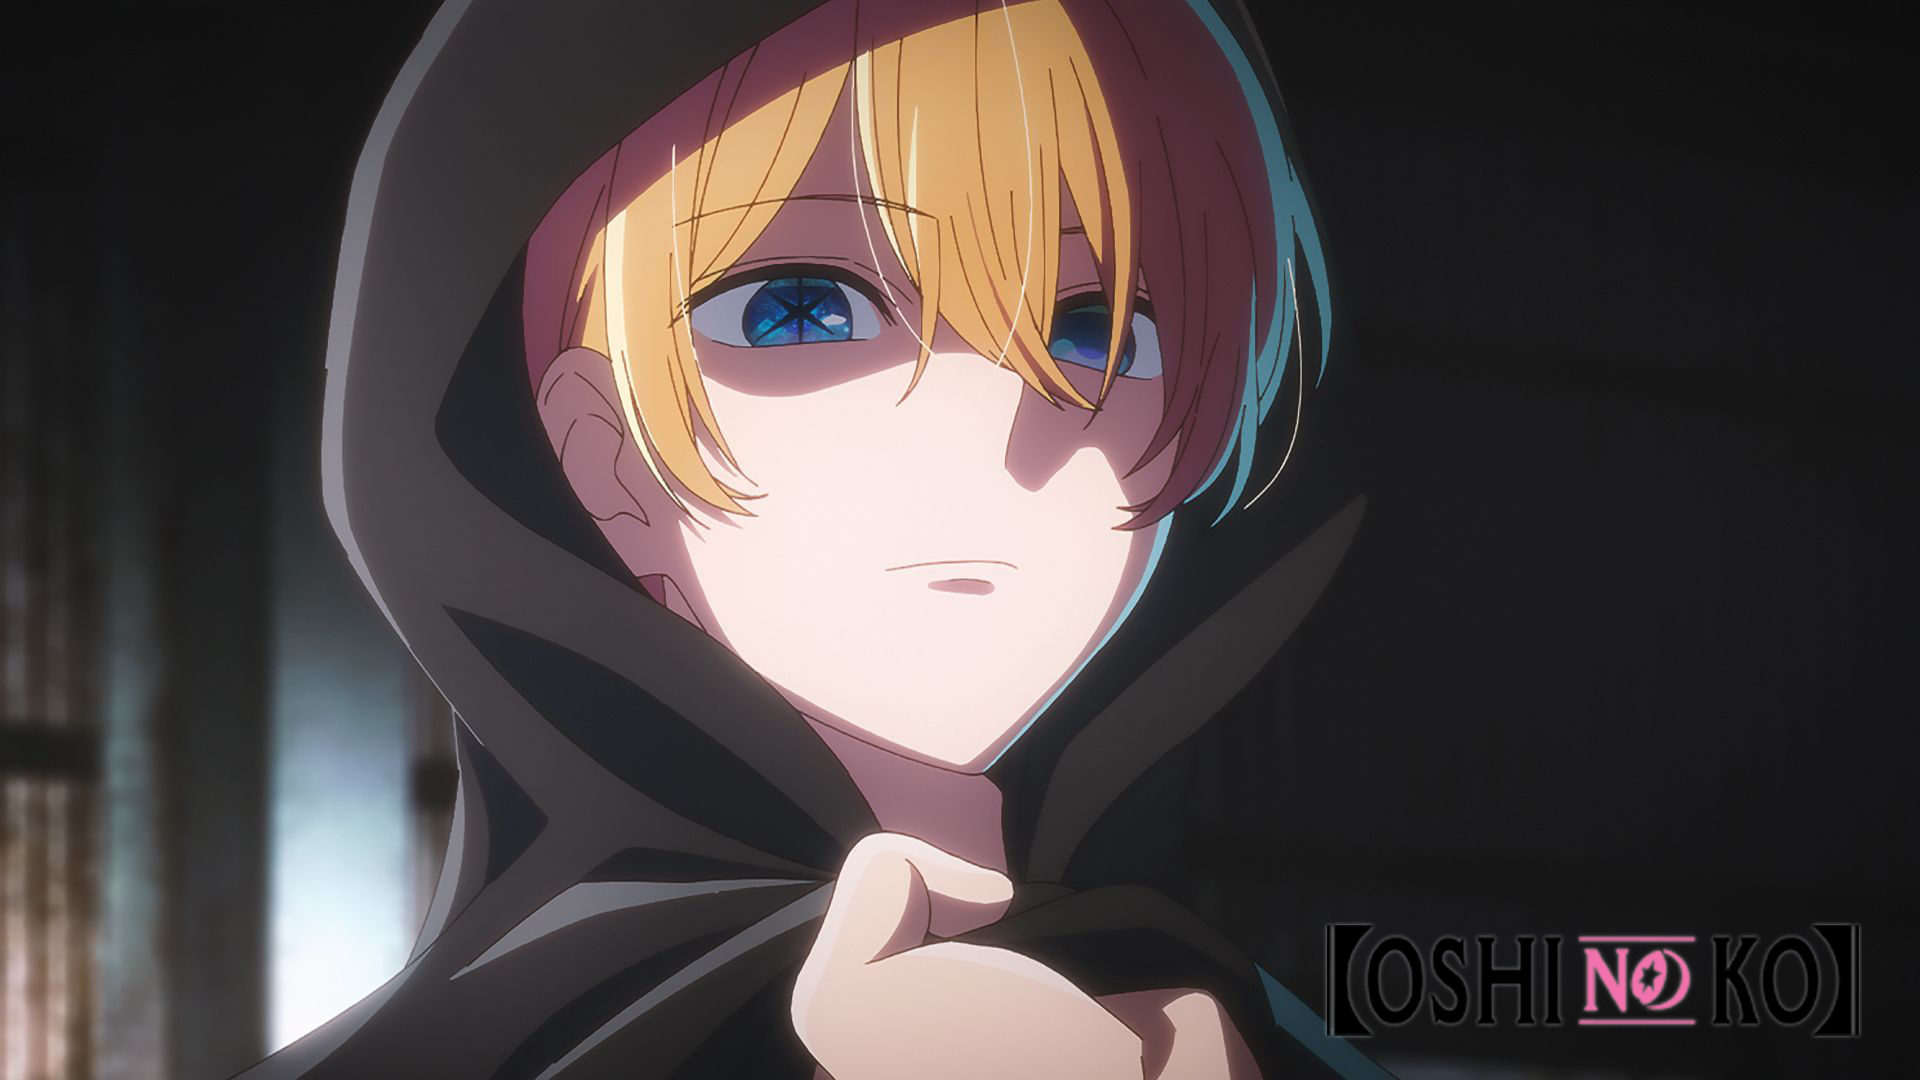 OSHI NO KO】Global on X: 🌟【OSHI NO KO】Episode 8 Now Simulcasting 🌟 Thank  you for waiting! The next episode is now available for streaming. Share  with us your thoughts with #OSHINOKO!  /